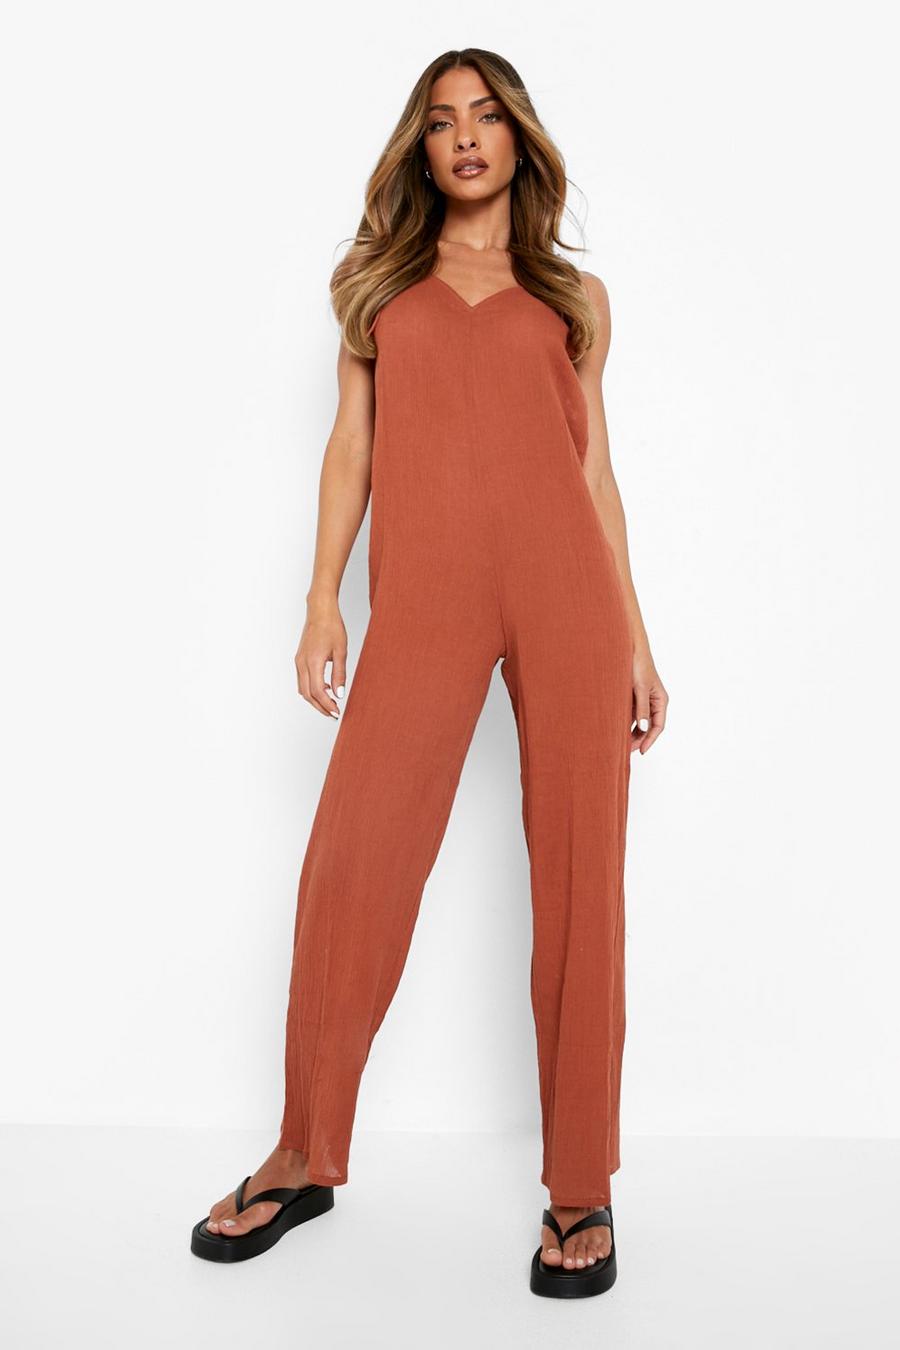 Tan marrone Cheesecloth Strappy Trapeze Jumpsuit